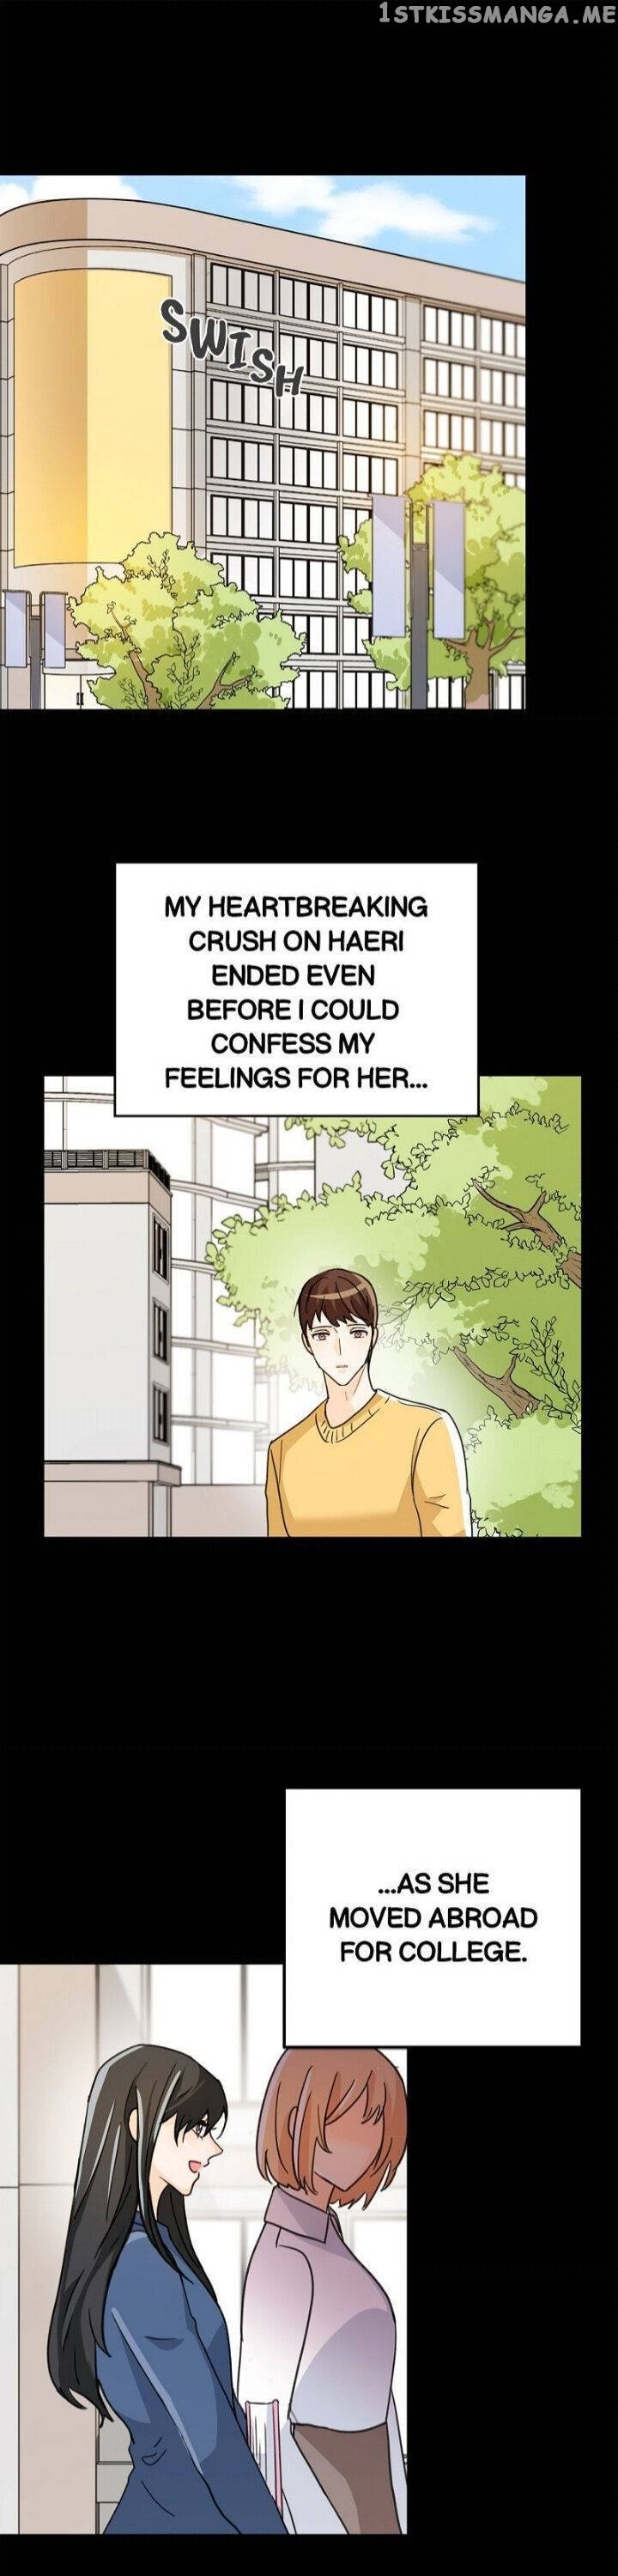 101 Ways to Win Her Heart chapter 21